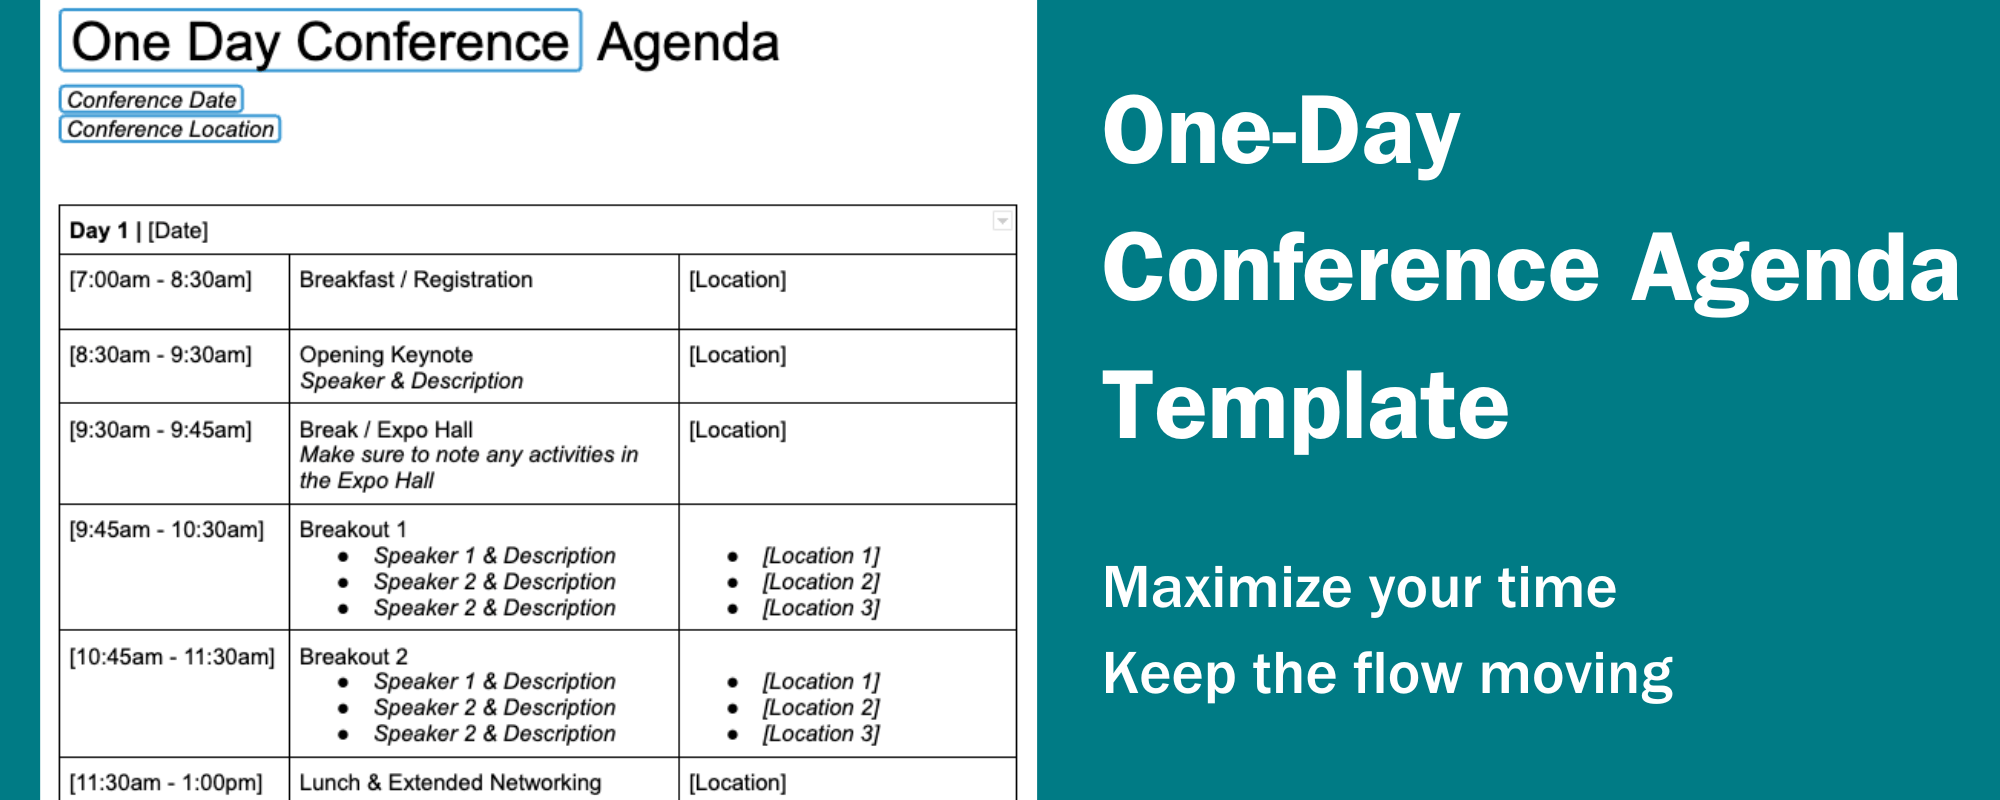 one-day-conference-agenda-template